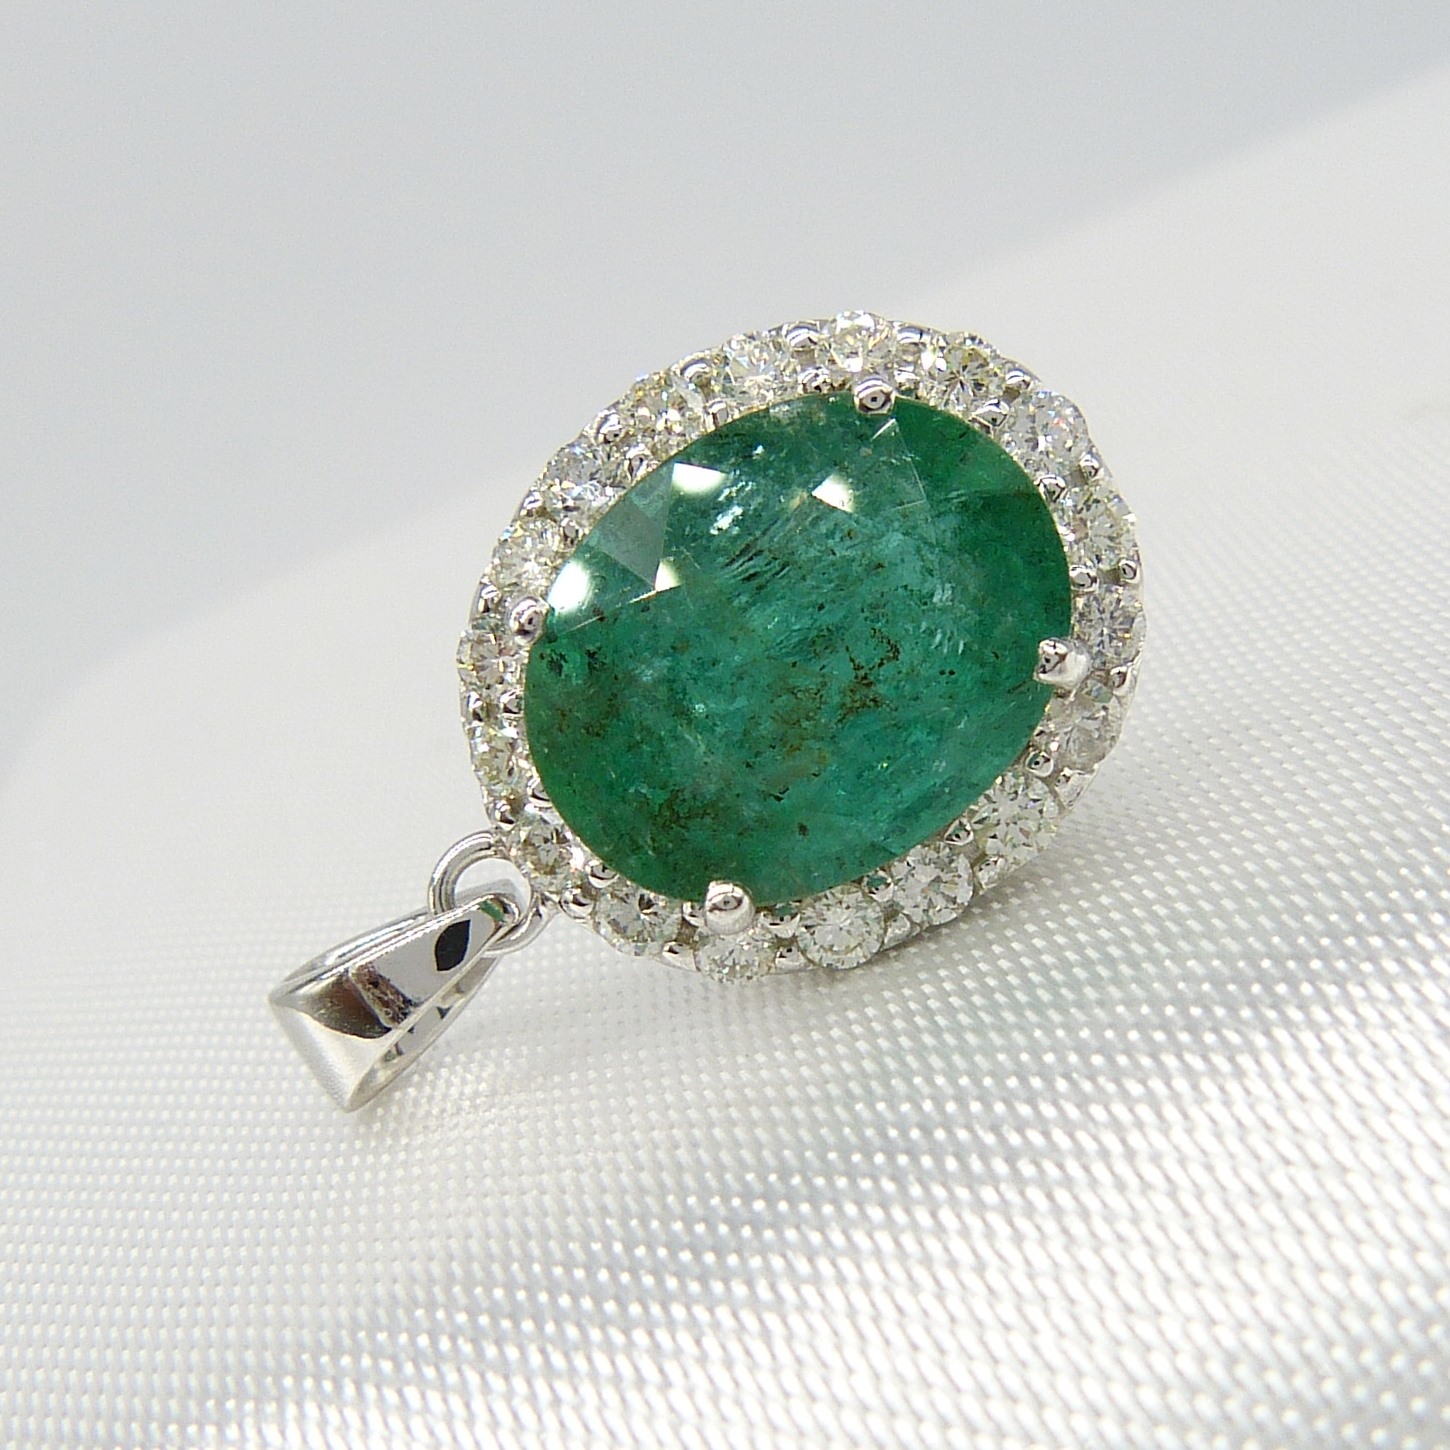 A large emerald and diamond halo pendant in 18ct white gold